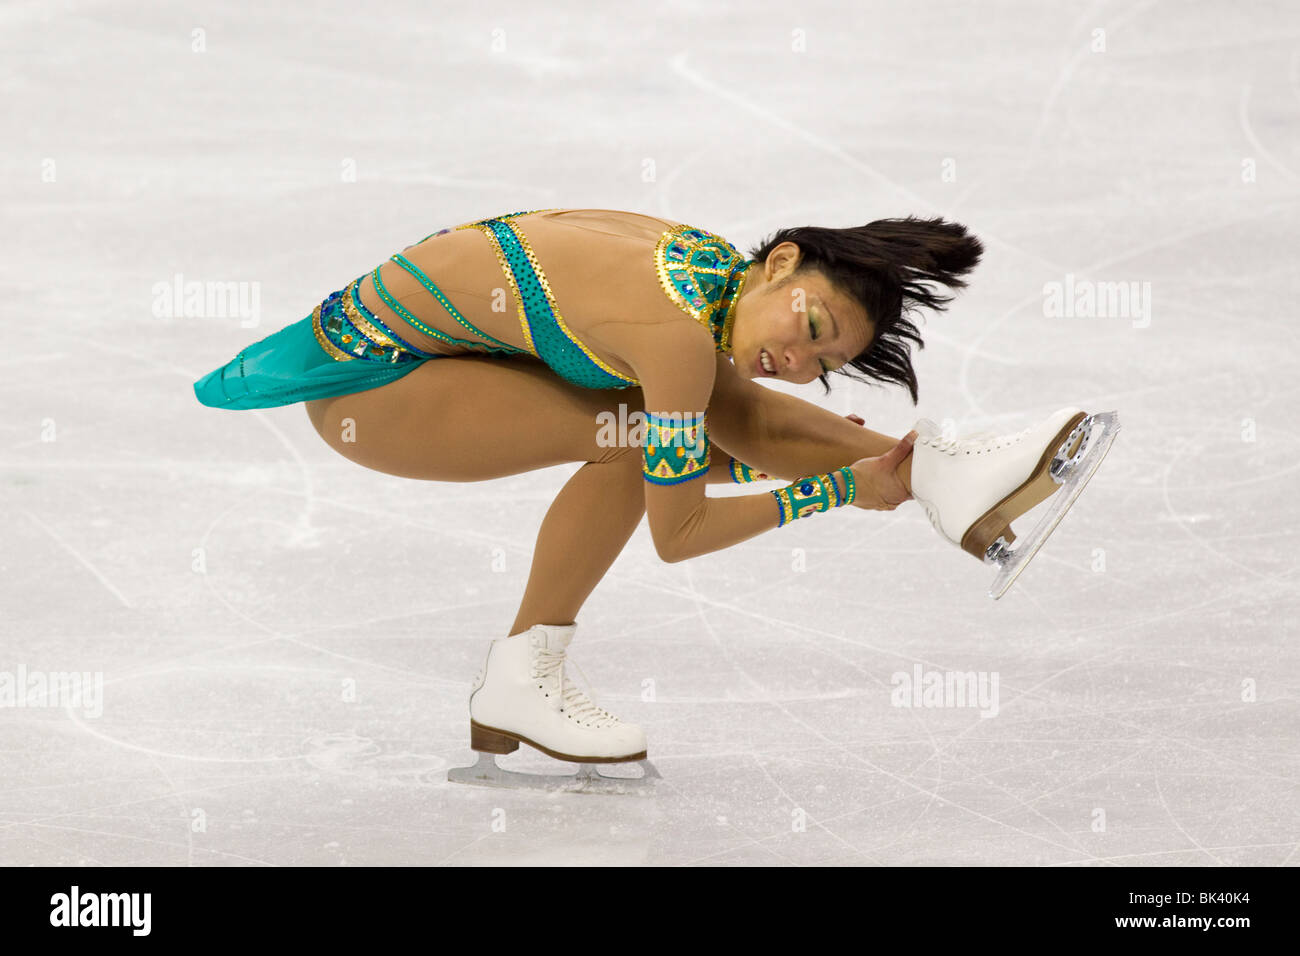 Miki Ando (JPN) competing in the Figure Skating Ladies Free Program at the 2010 Olympic Winter Games Stock Photo